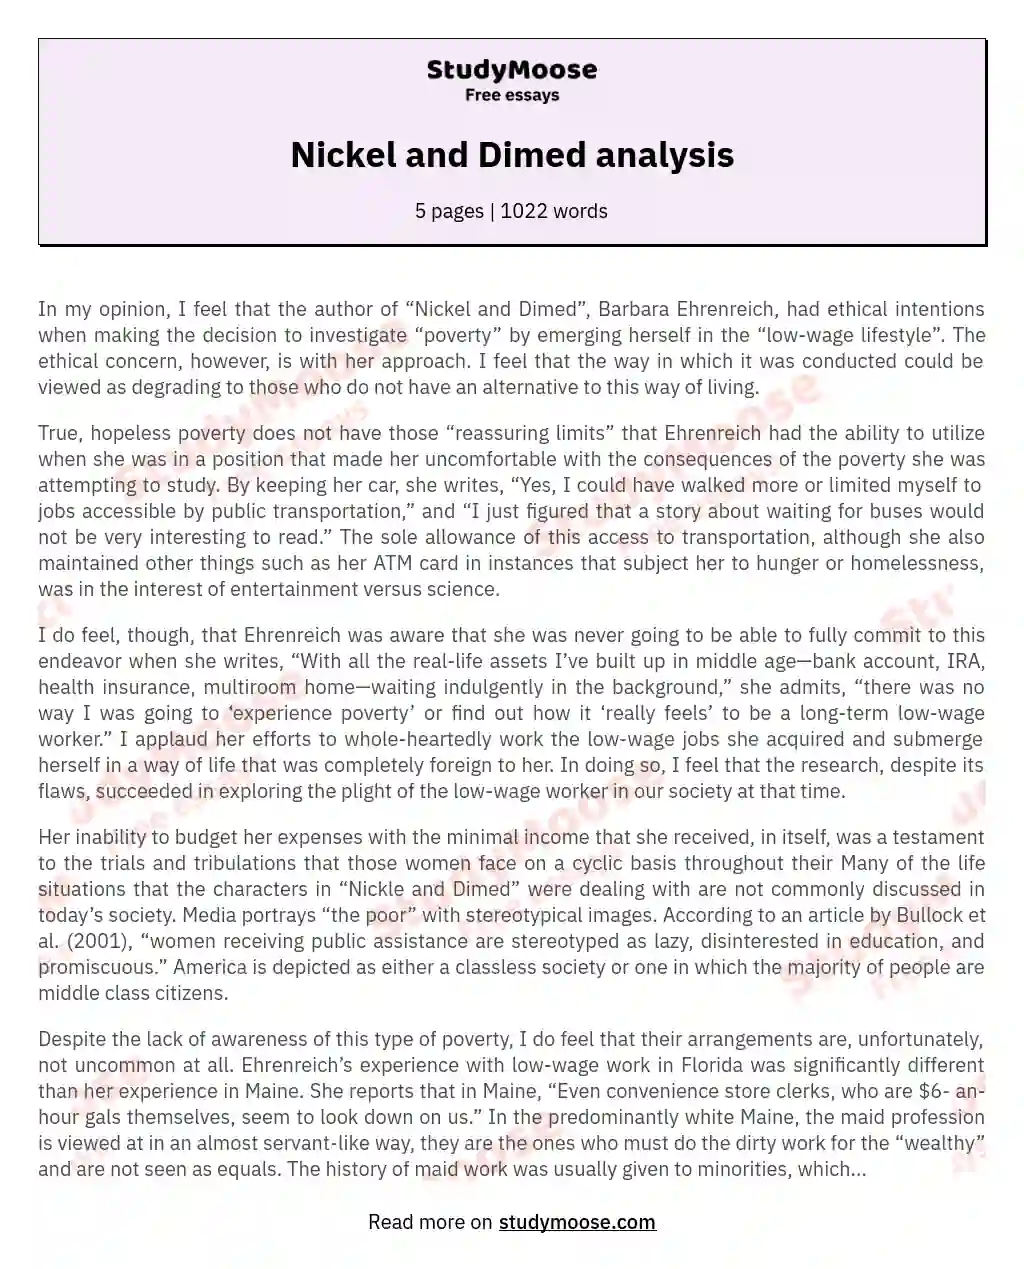 Nickel and Dimed analysis